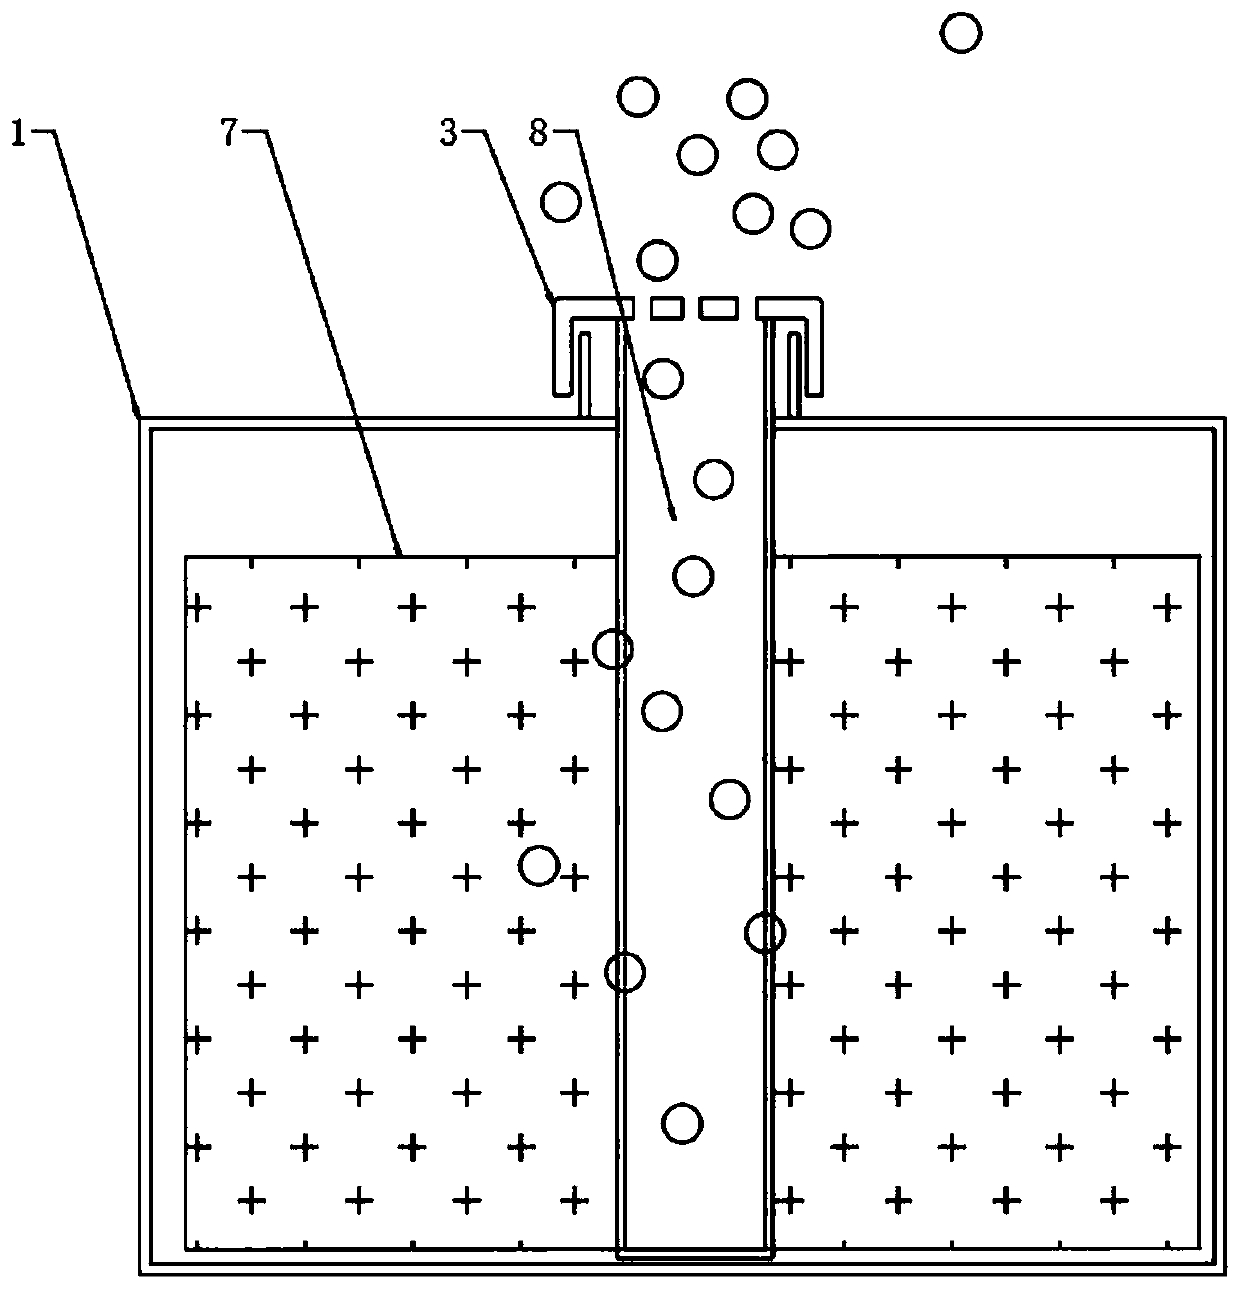 Novel multi-layer adherent cell culture container structure